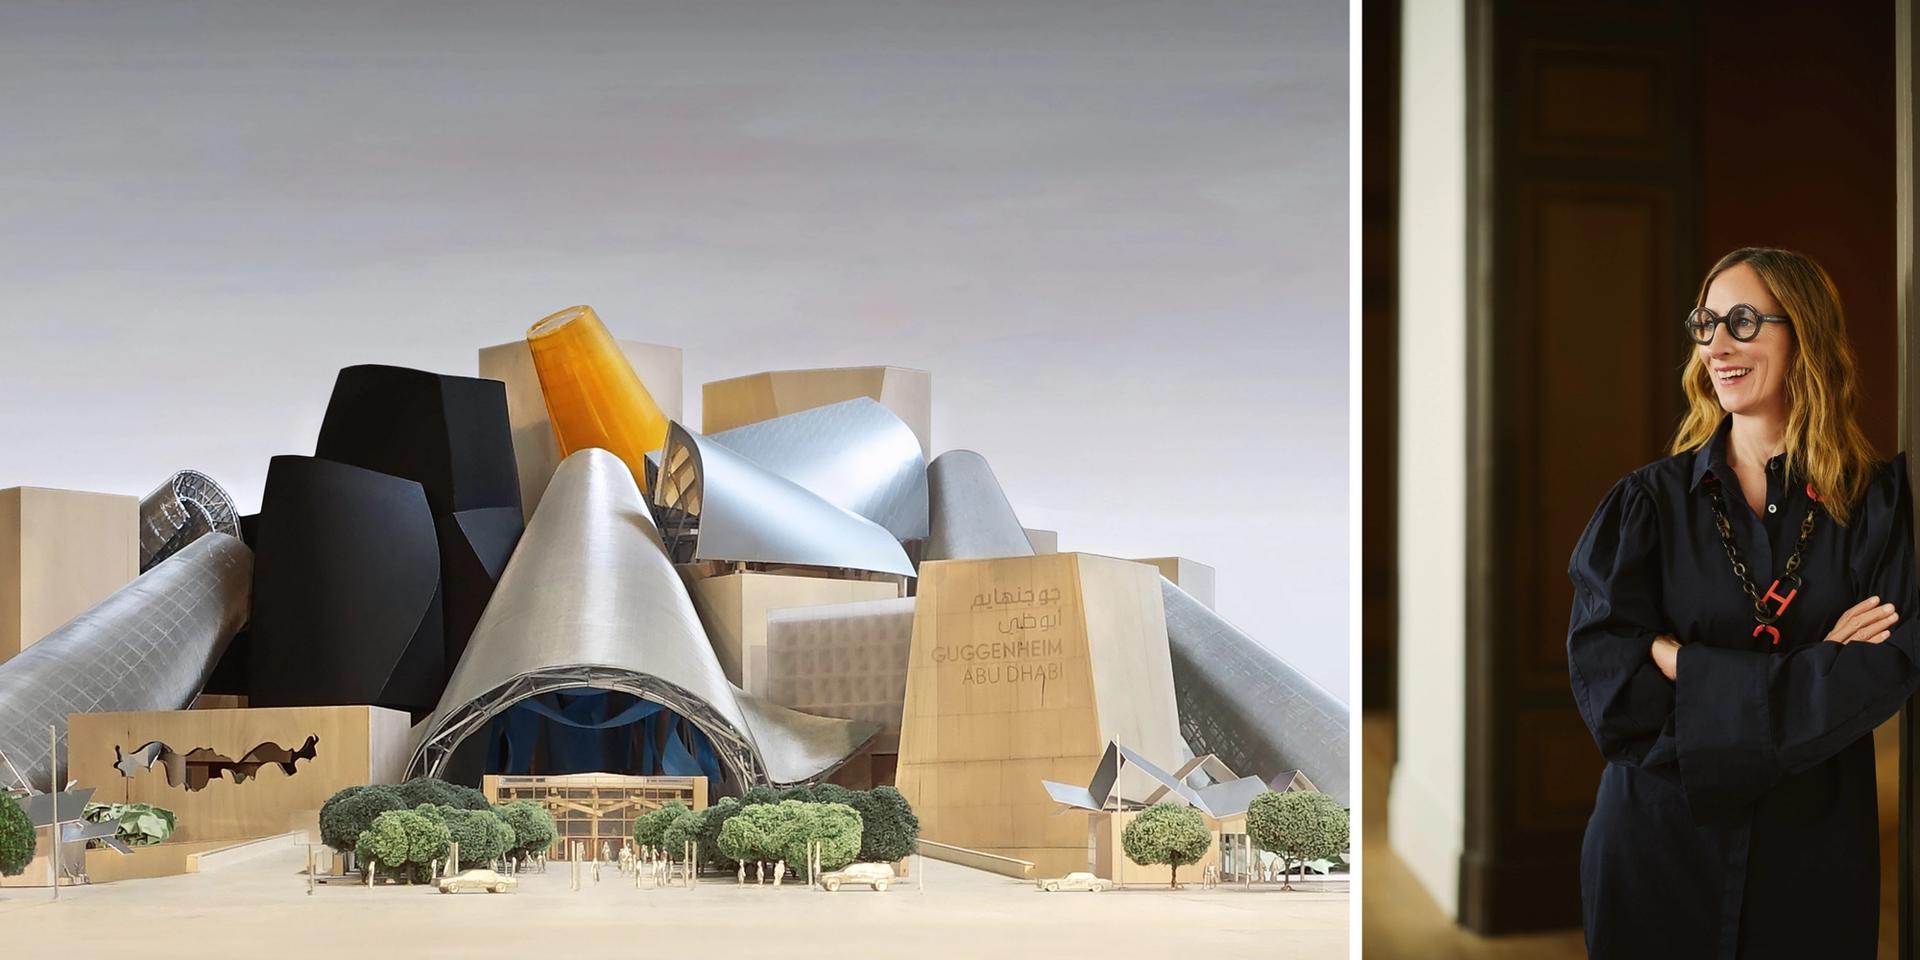 Stephanie Rosenthal (right) will oversee the final stages of the construction of the Guggenheim Abu Dhabi (left) Rendering of the Frank Gehry-designed Guggenheim Abu Dhabi. Image Courtesy of Gehry Partners, LLP